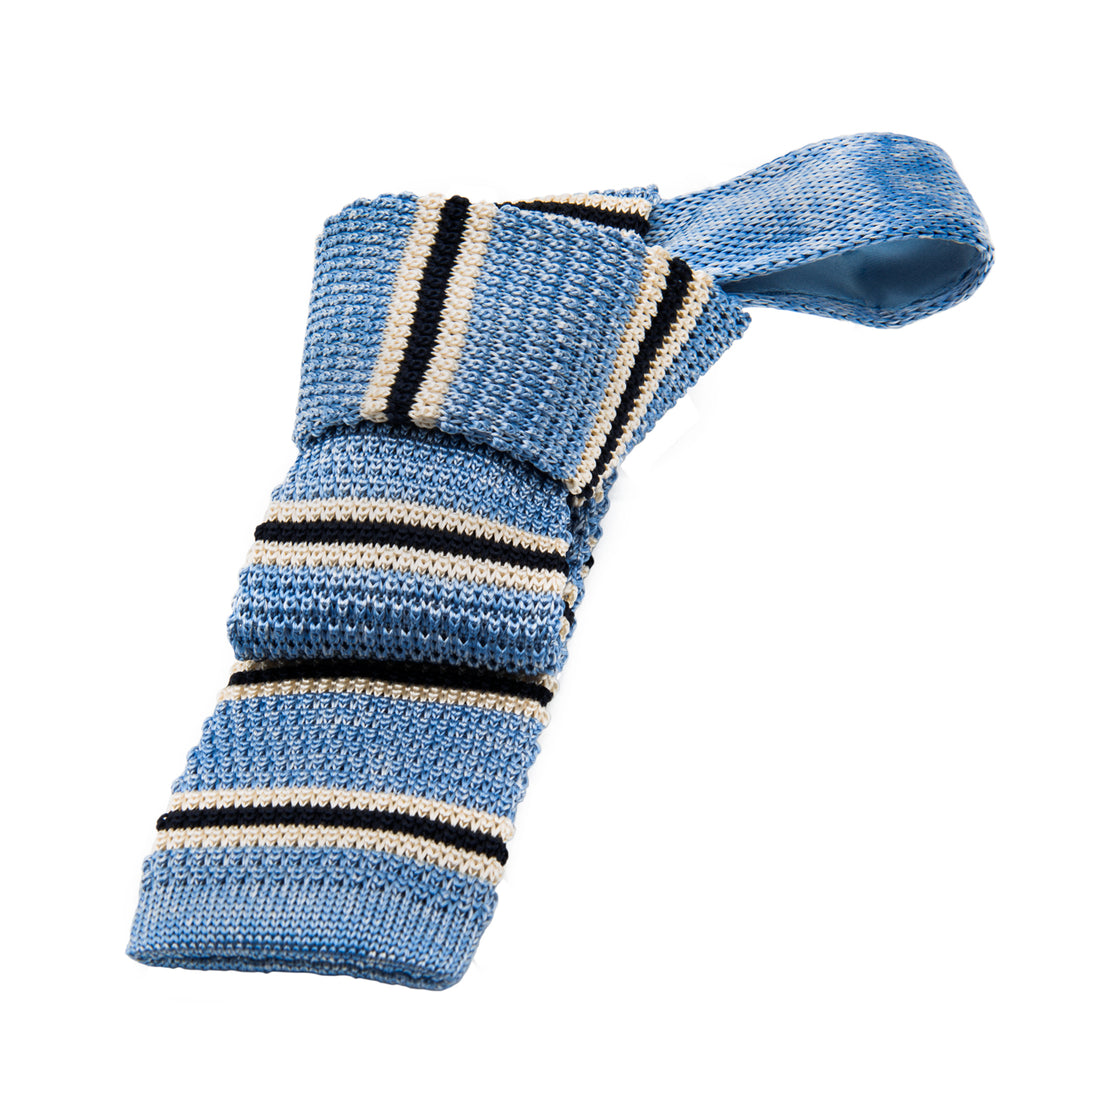 Blue Knitted Tie with Stripes